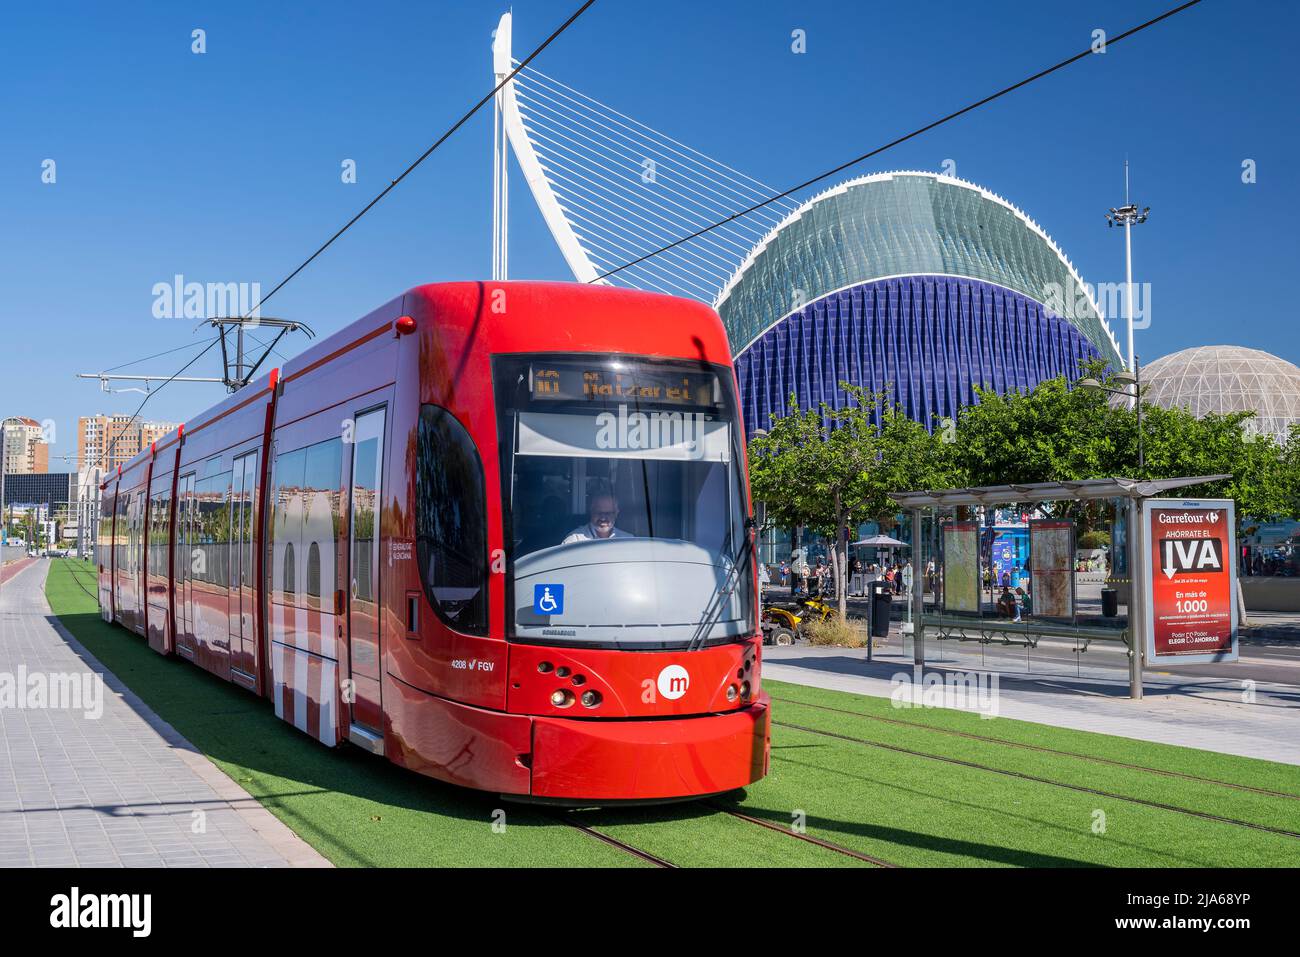 Tram of Line 10 light railway with City of Arts and Sciences in the background, Valencia, Spain Stock Photo